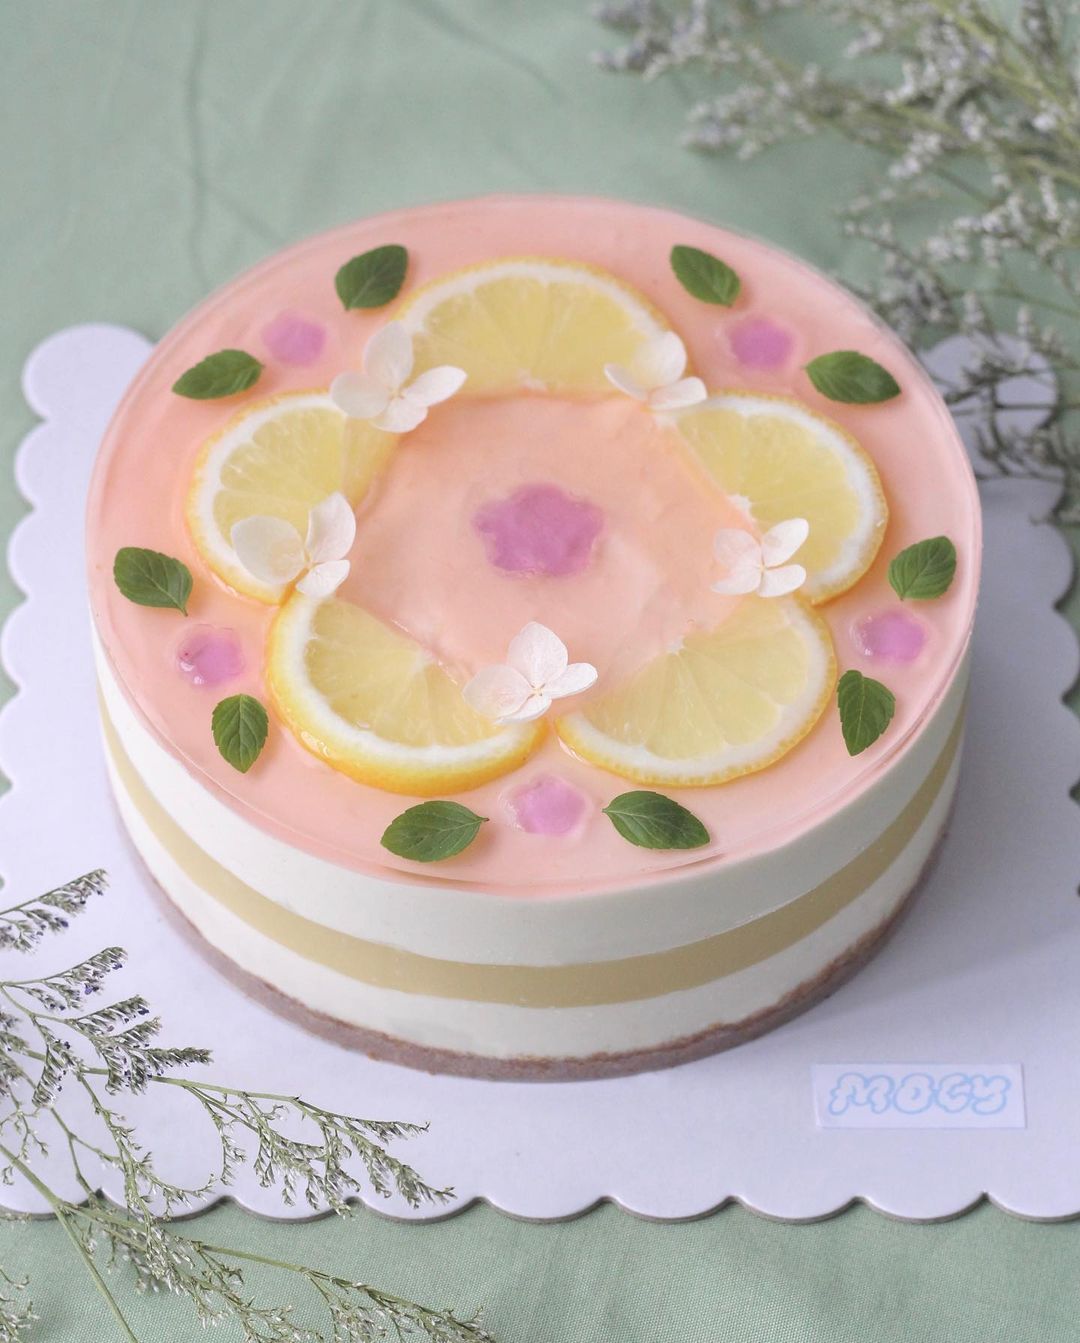 jelly cake from dessert shop Mocy 